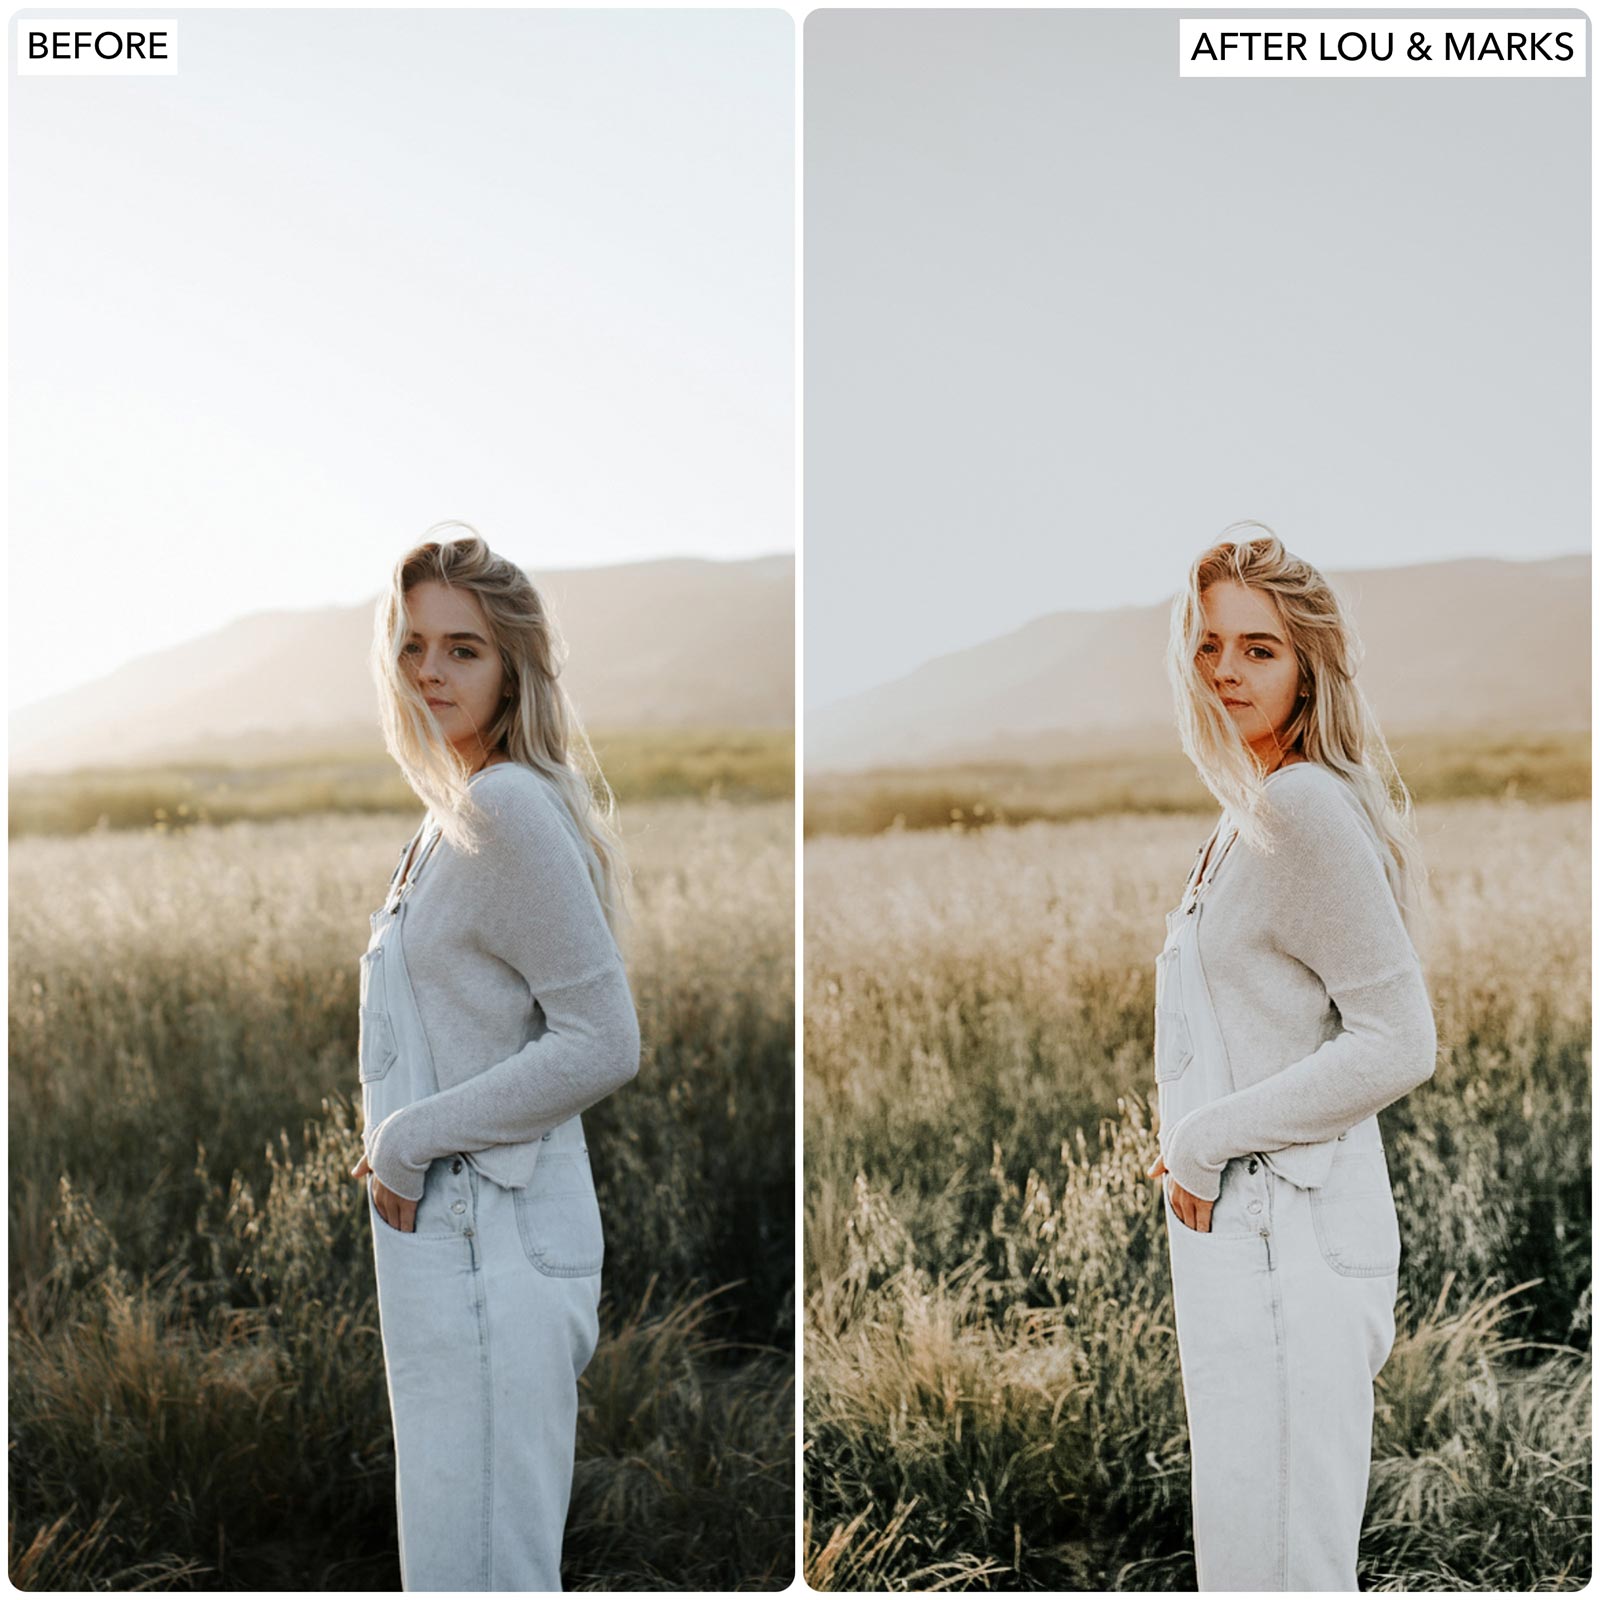 Before & After With Creamy Moody Lightroom Presets For Adobe Lightroom By Lou Marks Presets